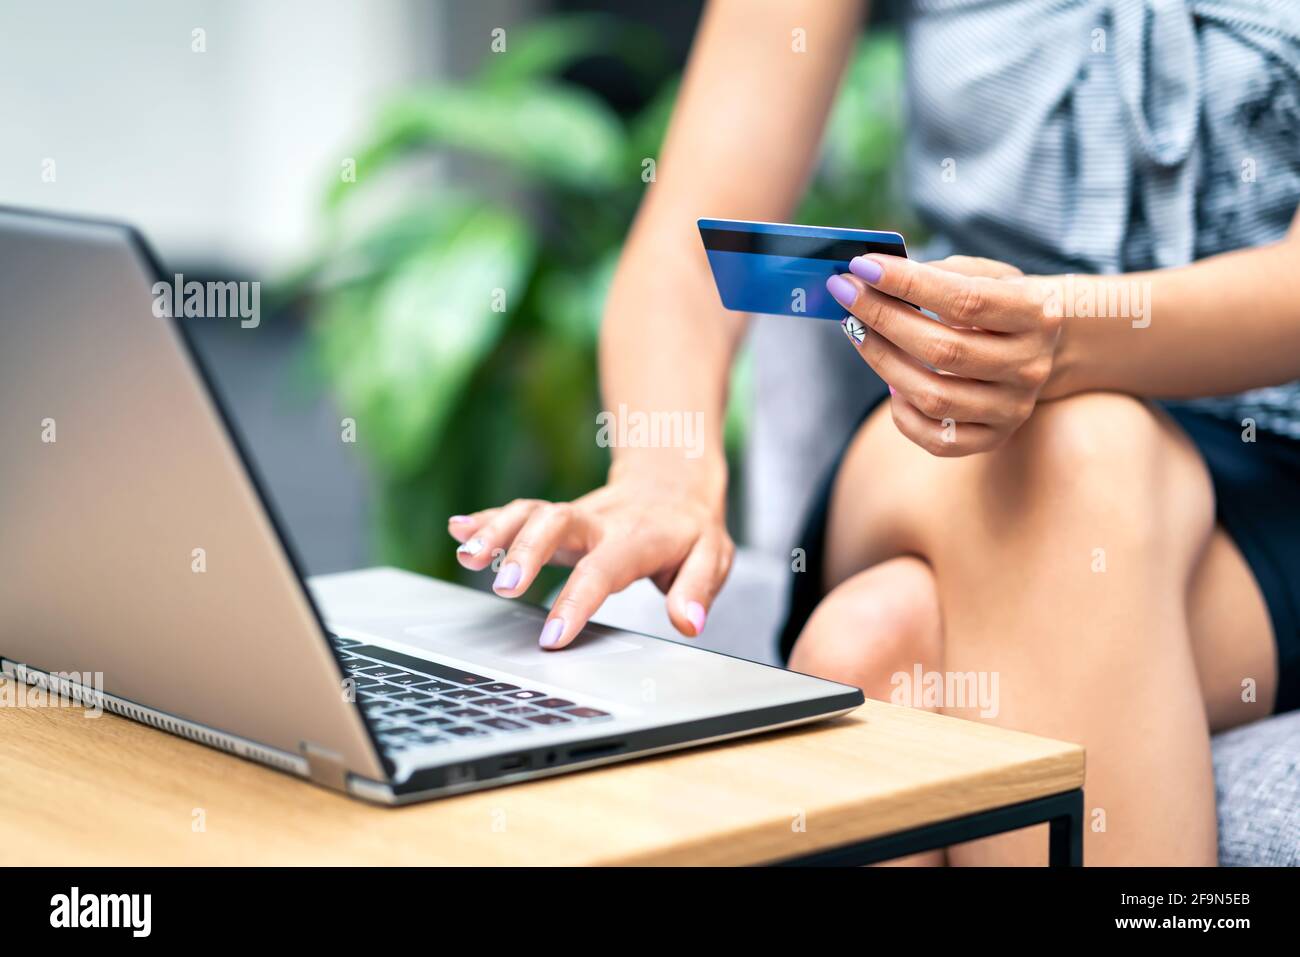 Credit card purchase and payment with laptop. Woman shopping online and buying from internet store sale. Ecommerce or transaction security from scam. Stock Photo